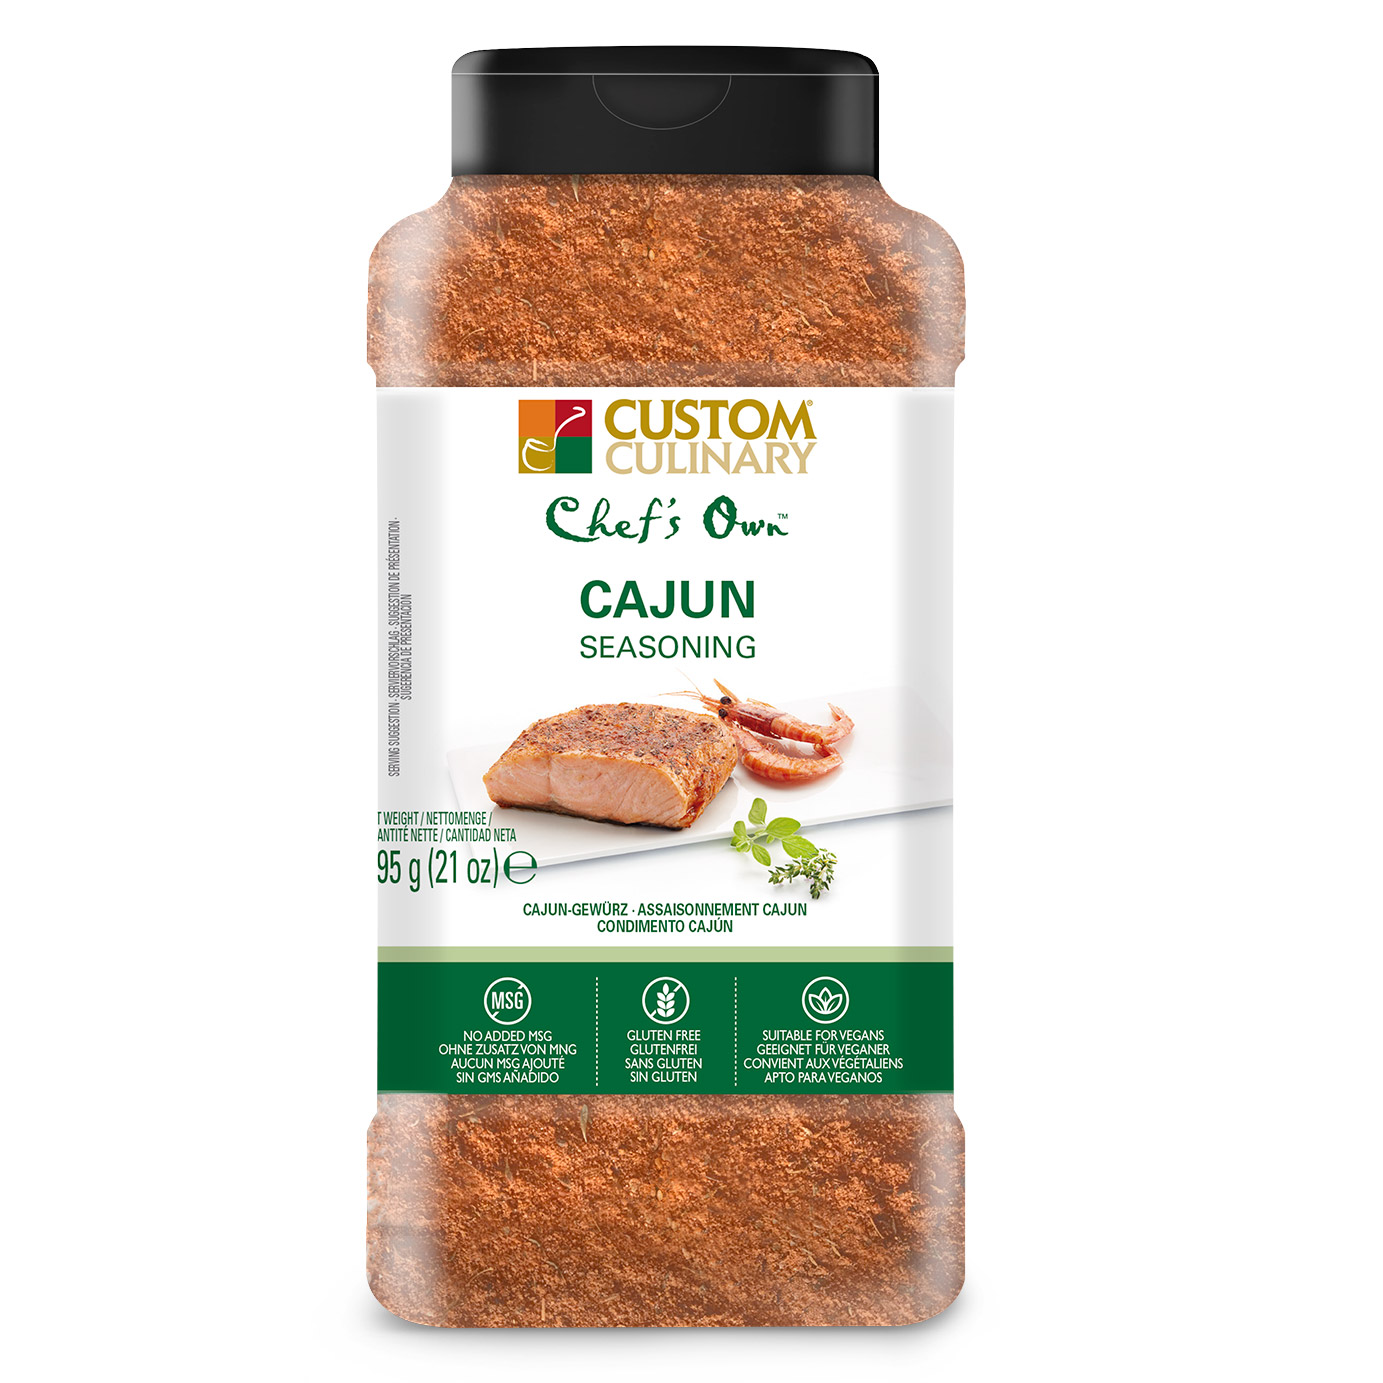 https://www.customculinary.global/CustomCulinary/media/Europe/Germany/Products/Product%20Detail%20Pages/Product%20Images/Seasoning/cc-eu_2622-cajun_seasonings_chefsown.jpg?ext=.jpg?size=600